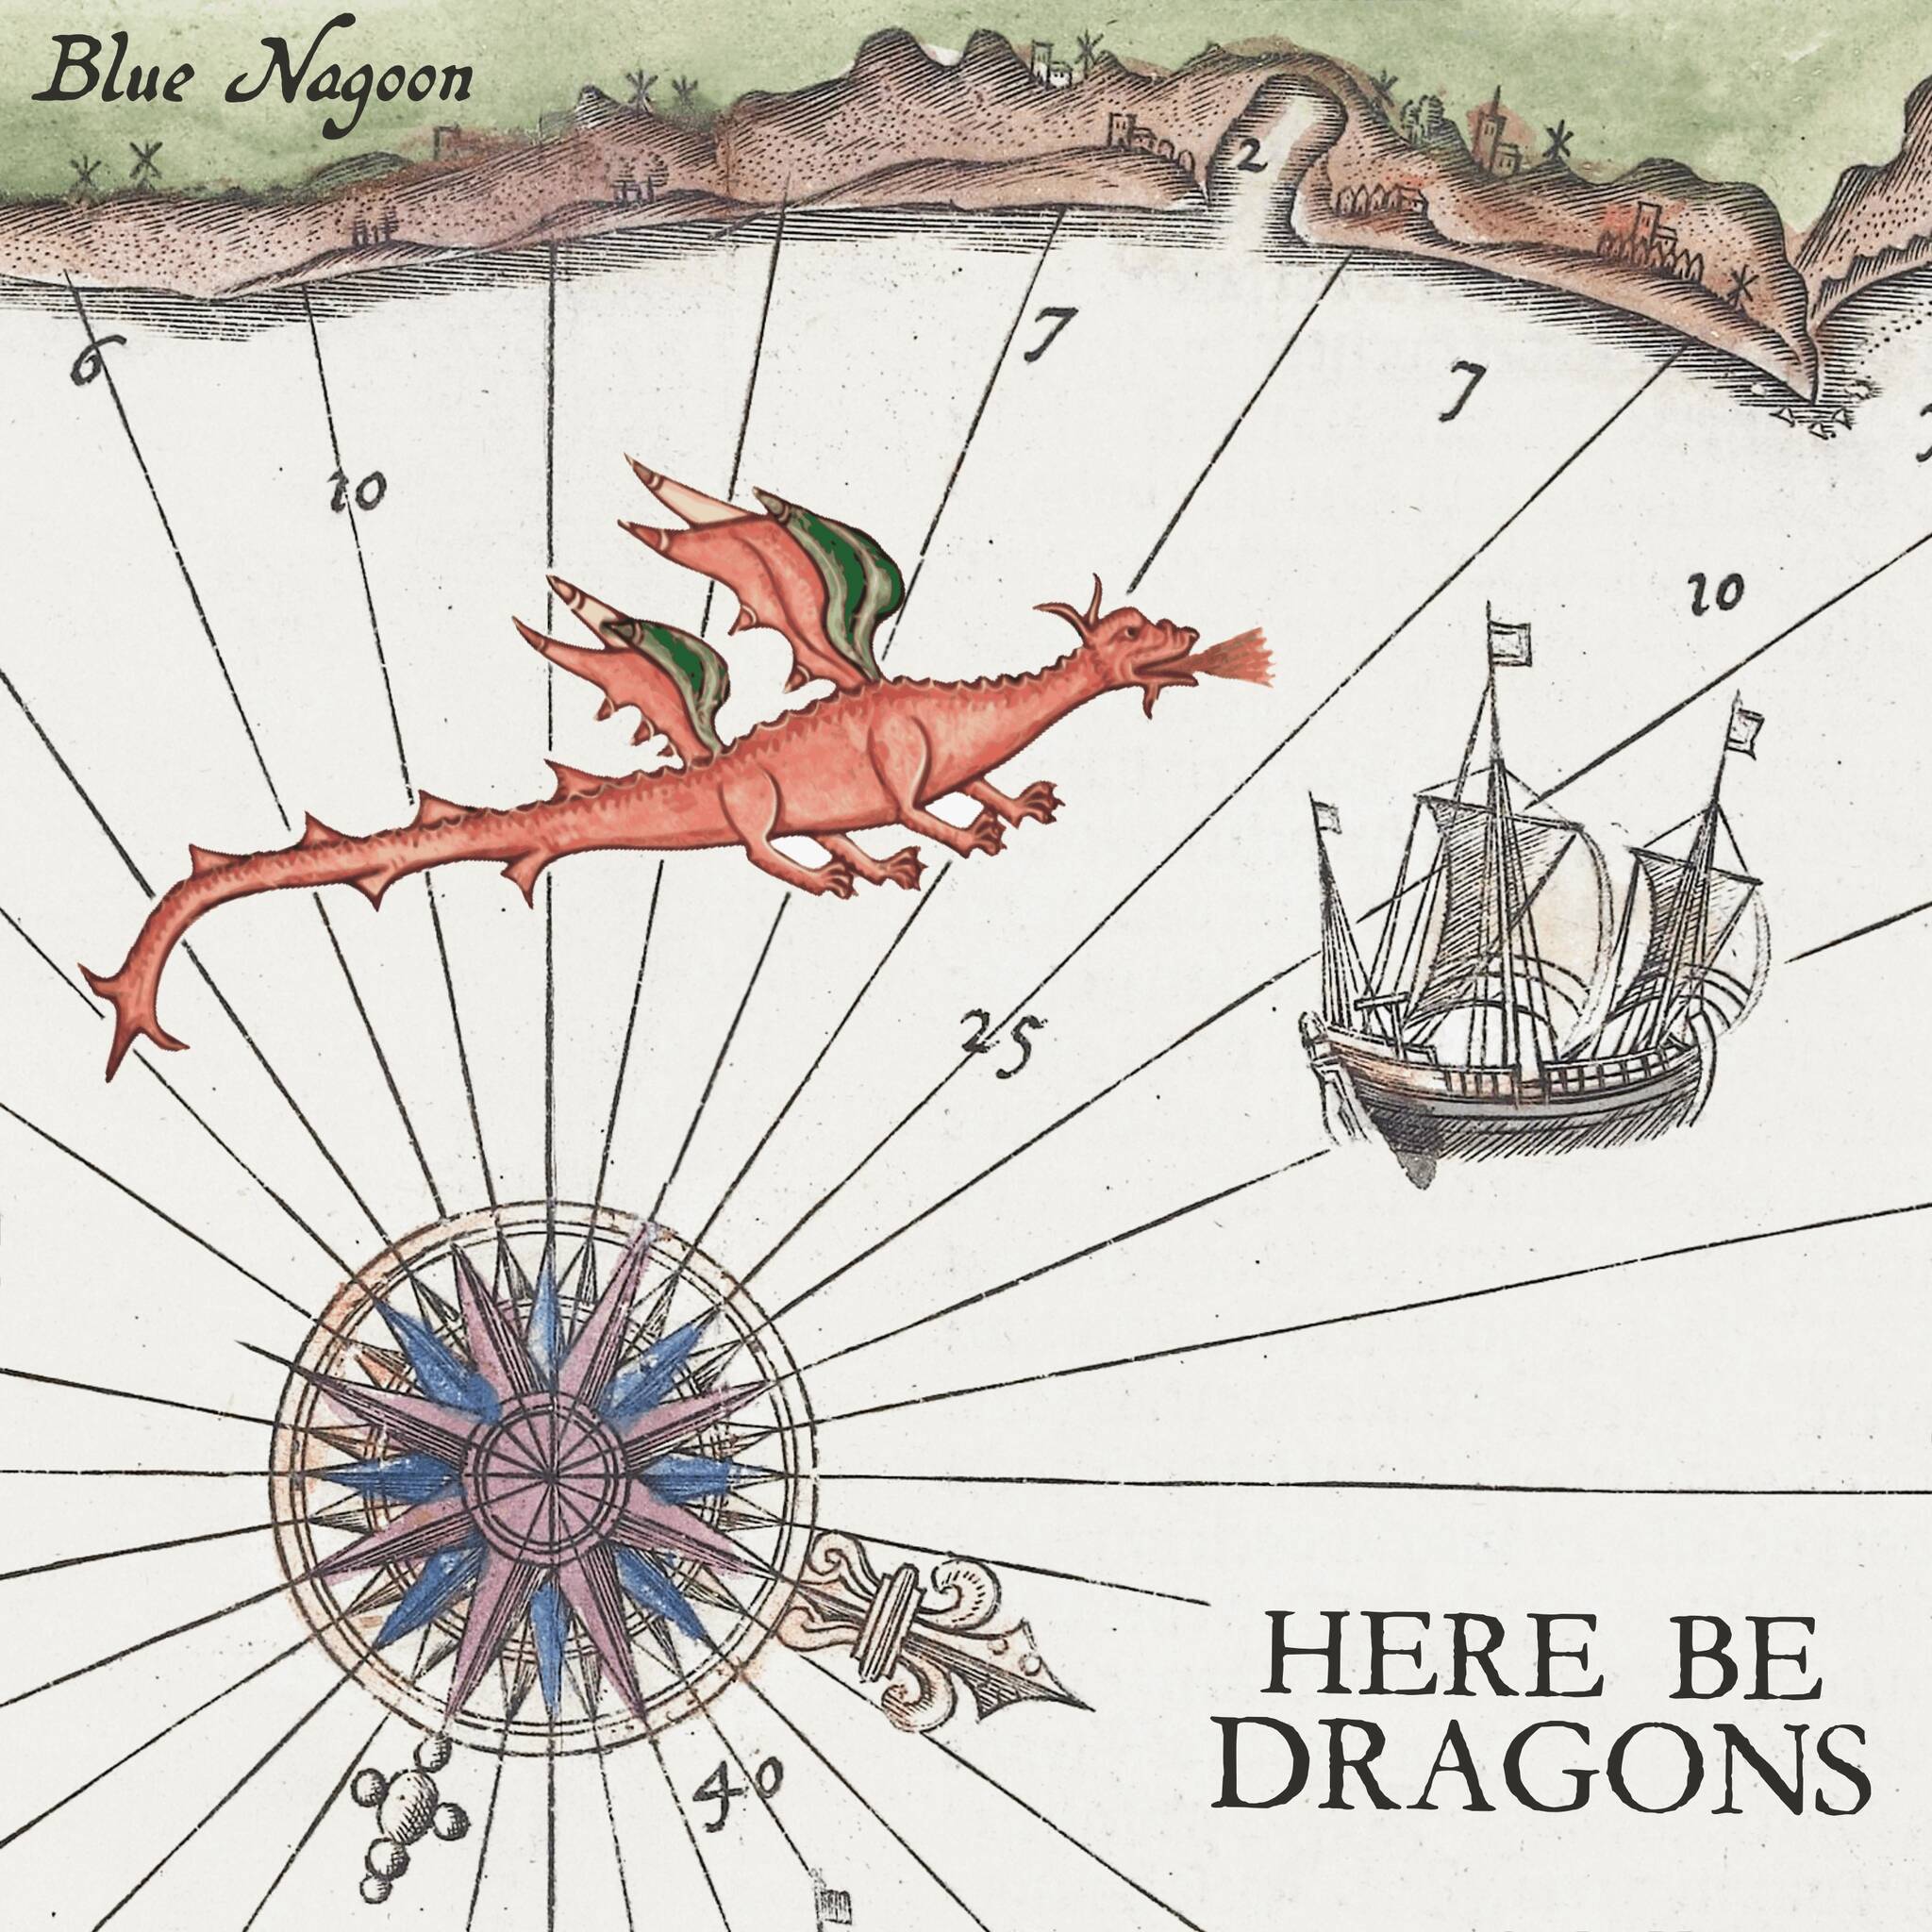 Album cover art for Blue Nagoon’s “Here Be Dragons,” which will be available on streaming services and for purchase through Bandcamp starting on Friday, Oct. 7. (Courtesy Photo / Blue Nagoon)